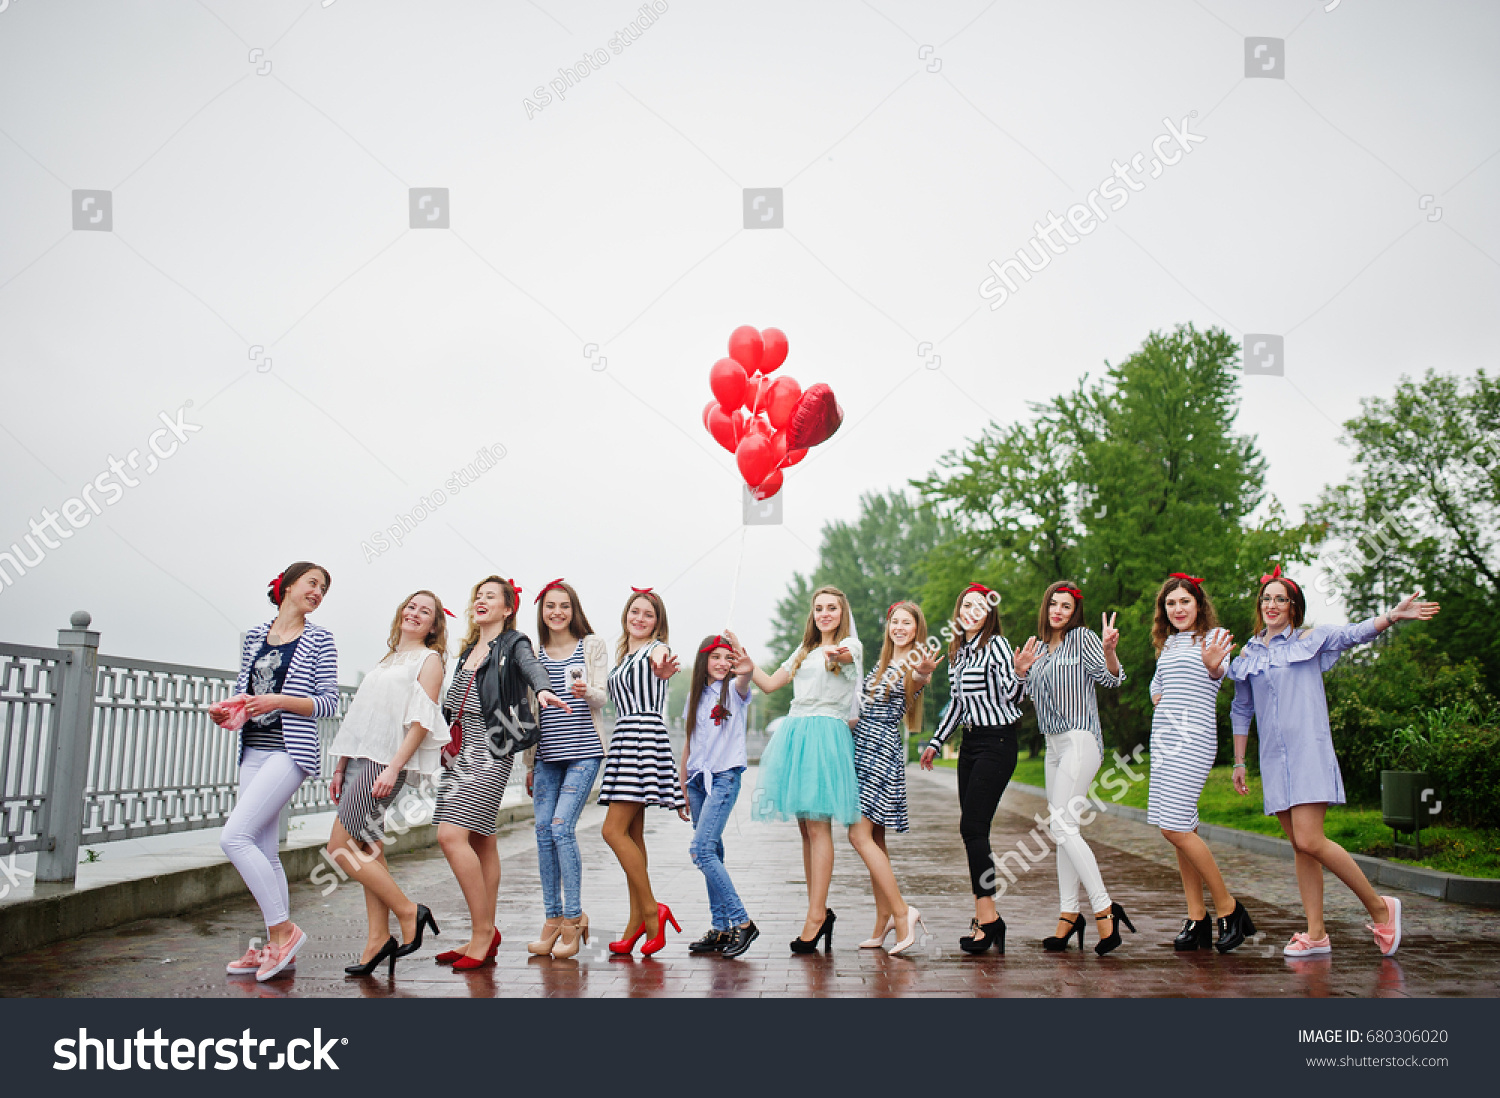 Eleven amazingly-looking braidsmaids with stunning bride posing with red heart-shaped balloons on the pavement against the lake in the background. #680306020